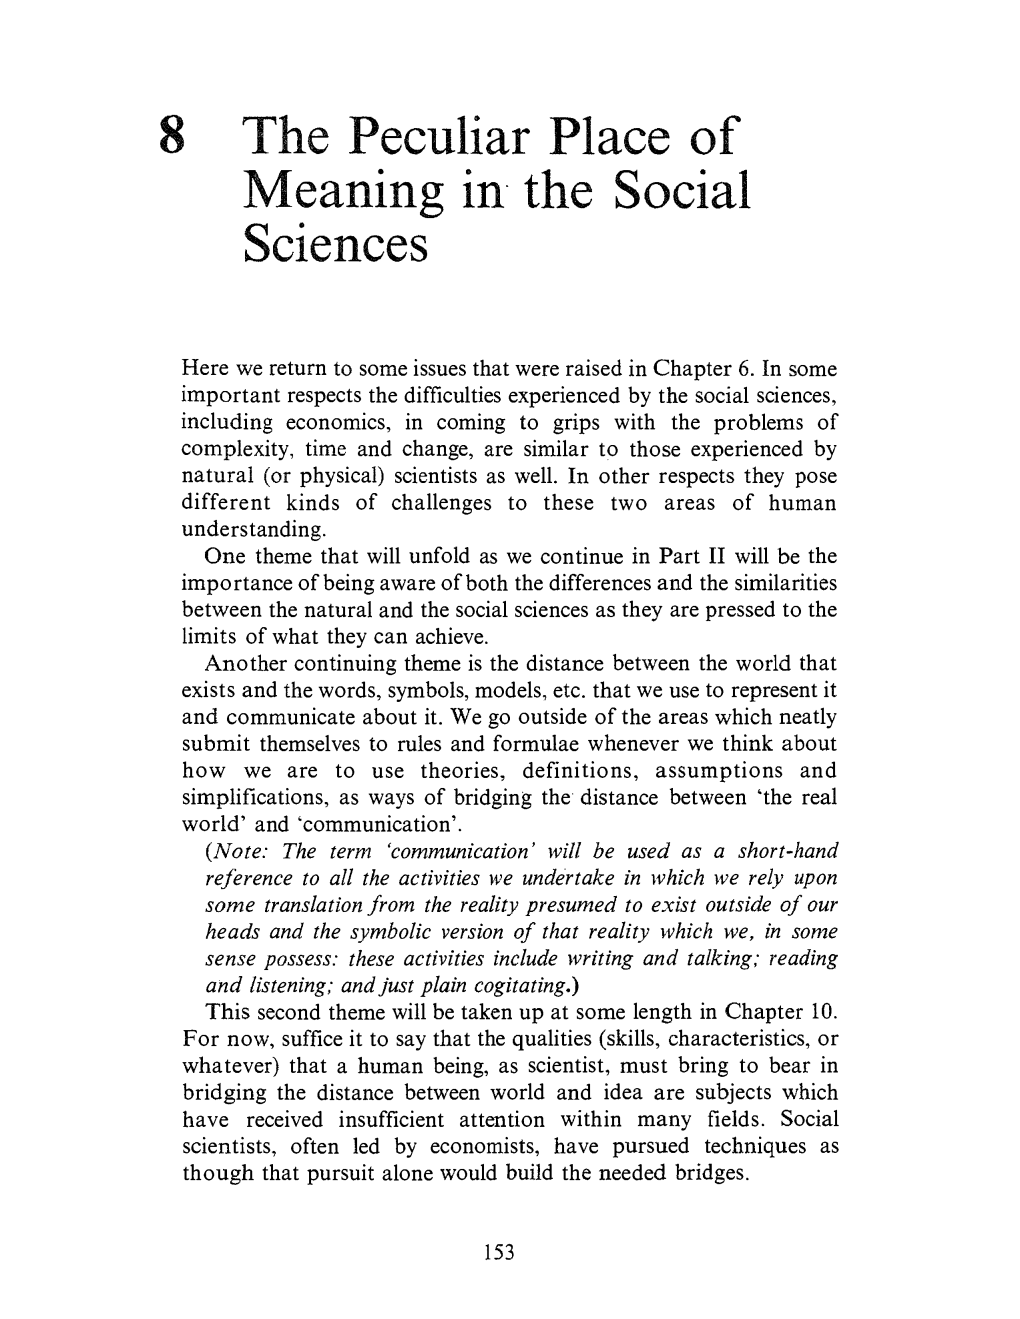 The Peculiar Place of Meaning in the Social Sciences